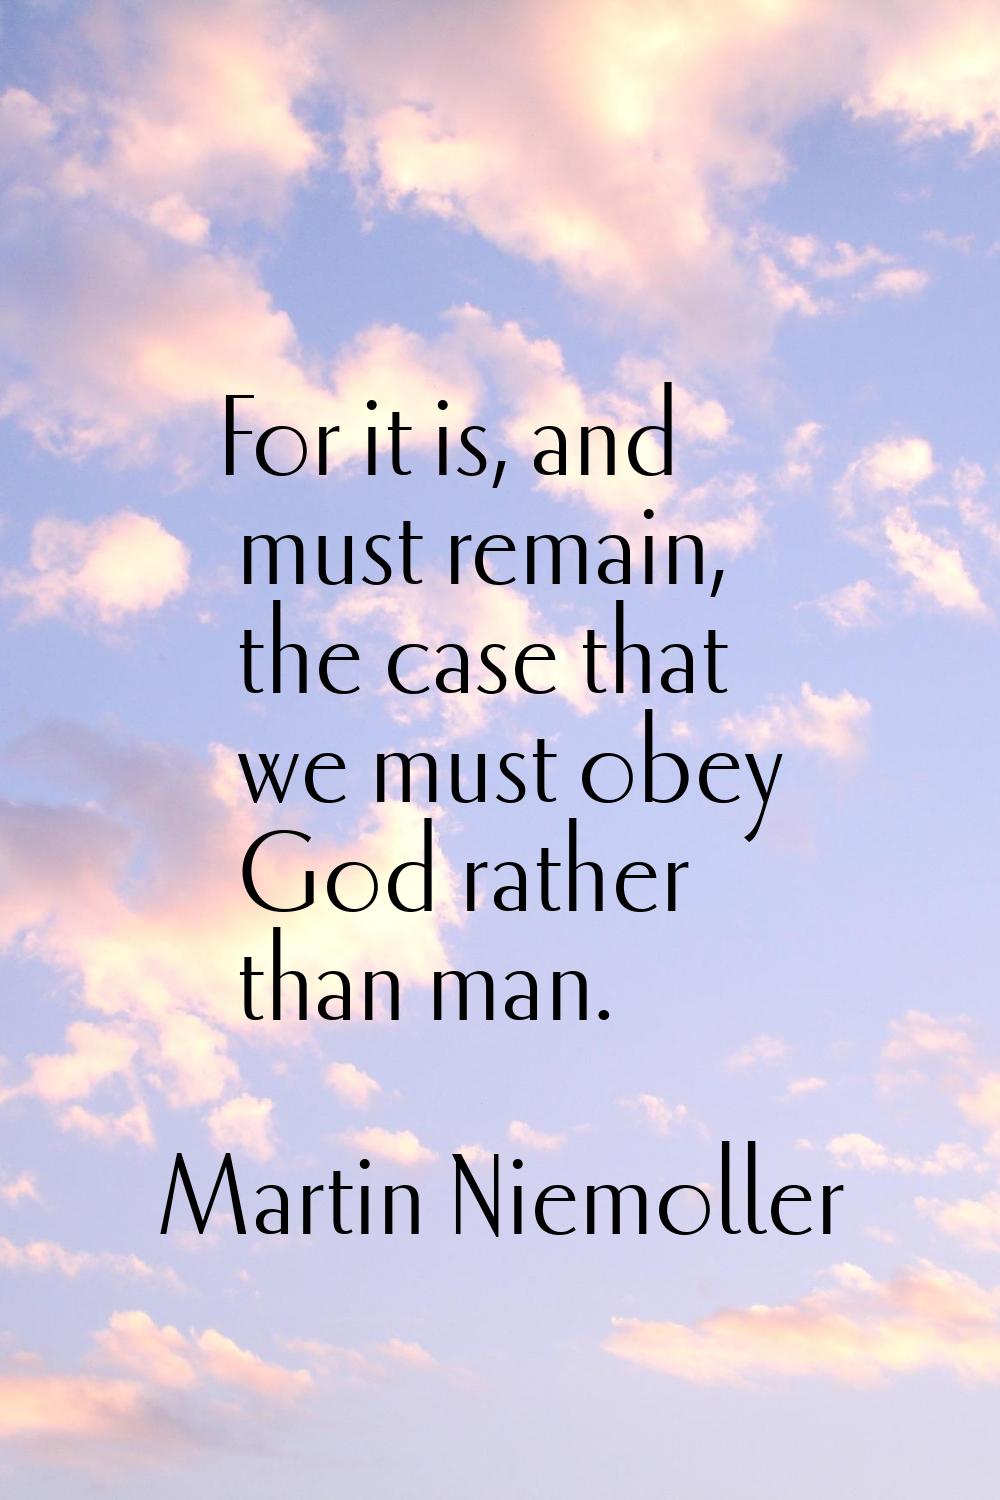 For it is, and must remain, the case that we must obey God rather than man.